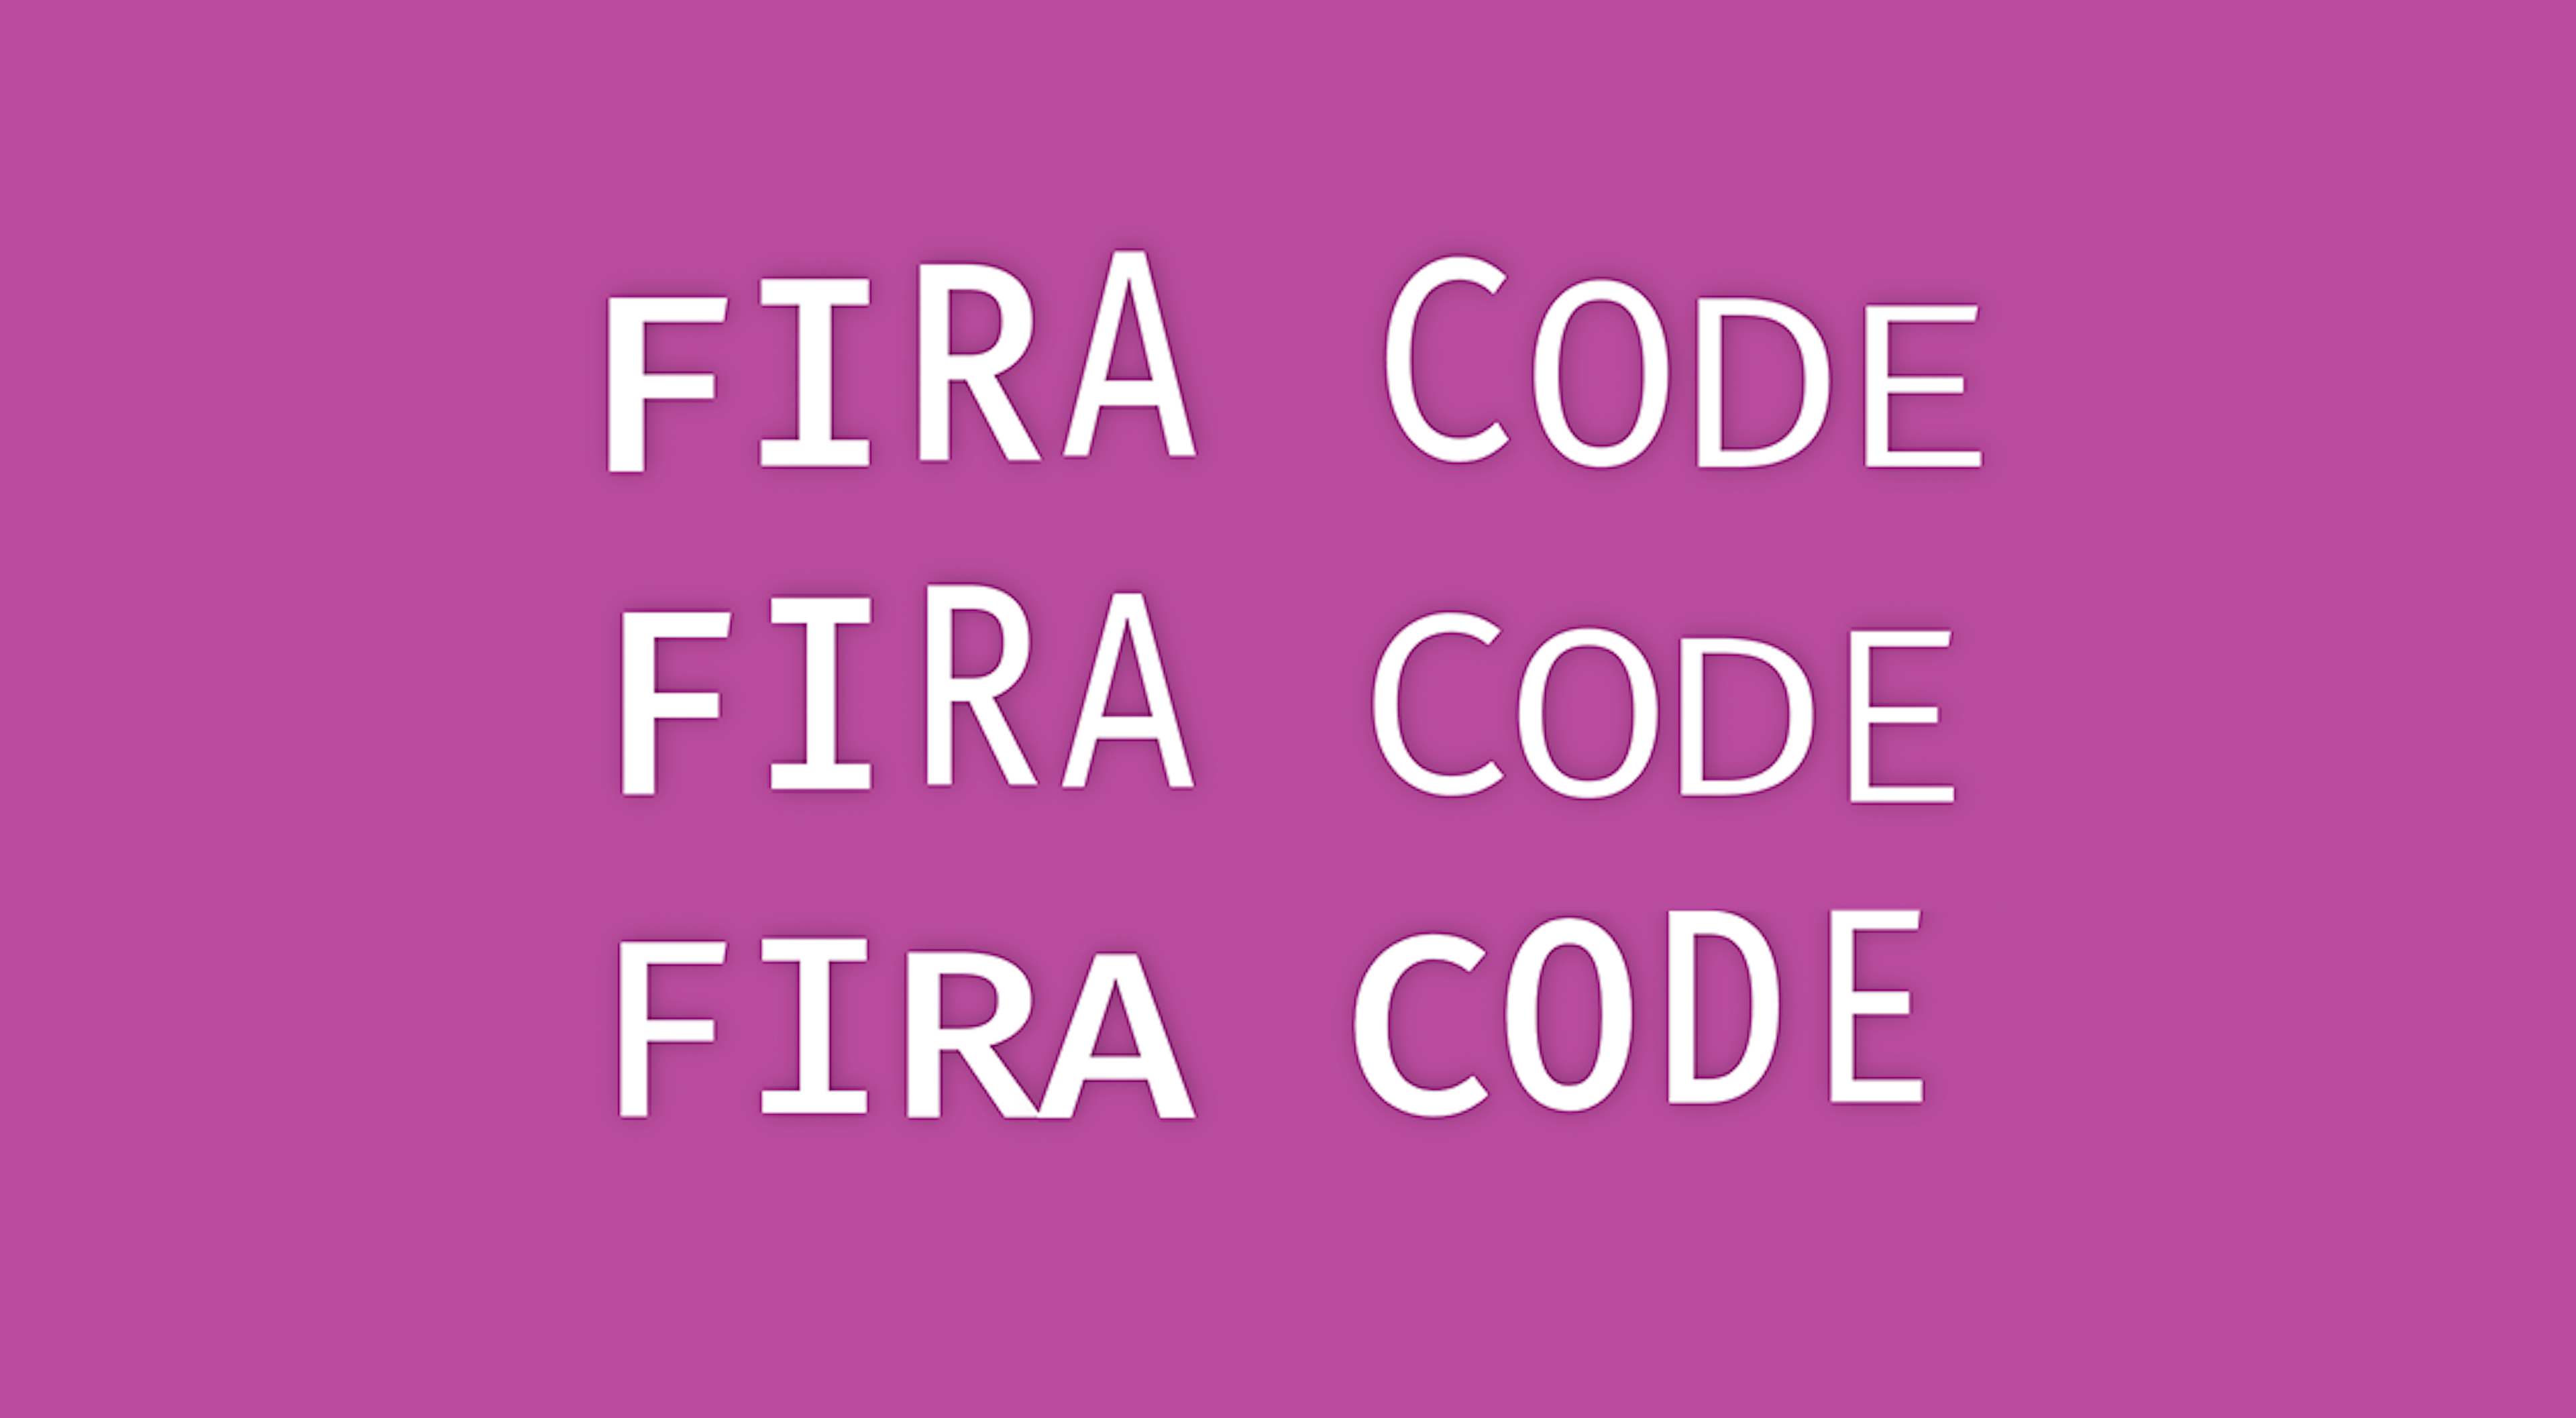 Fira Code in different weights on a pink background